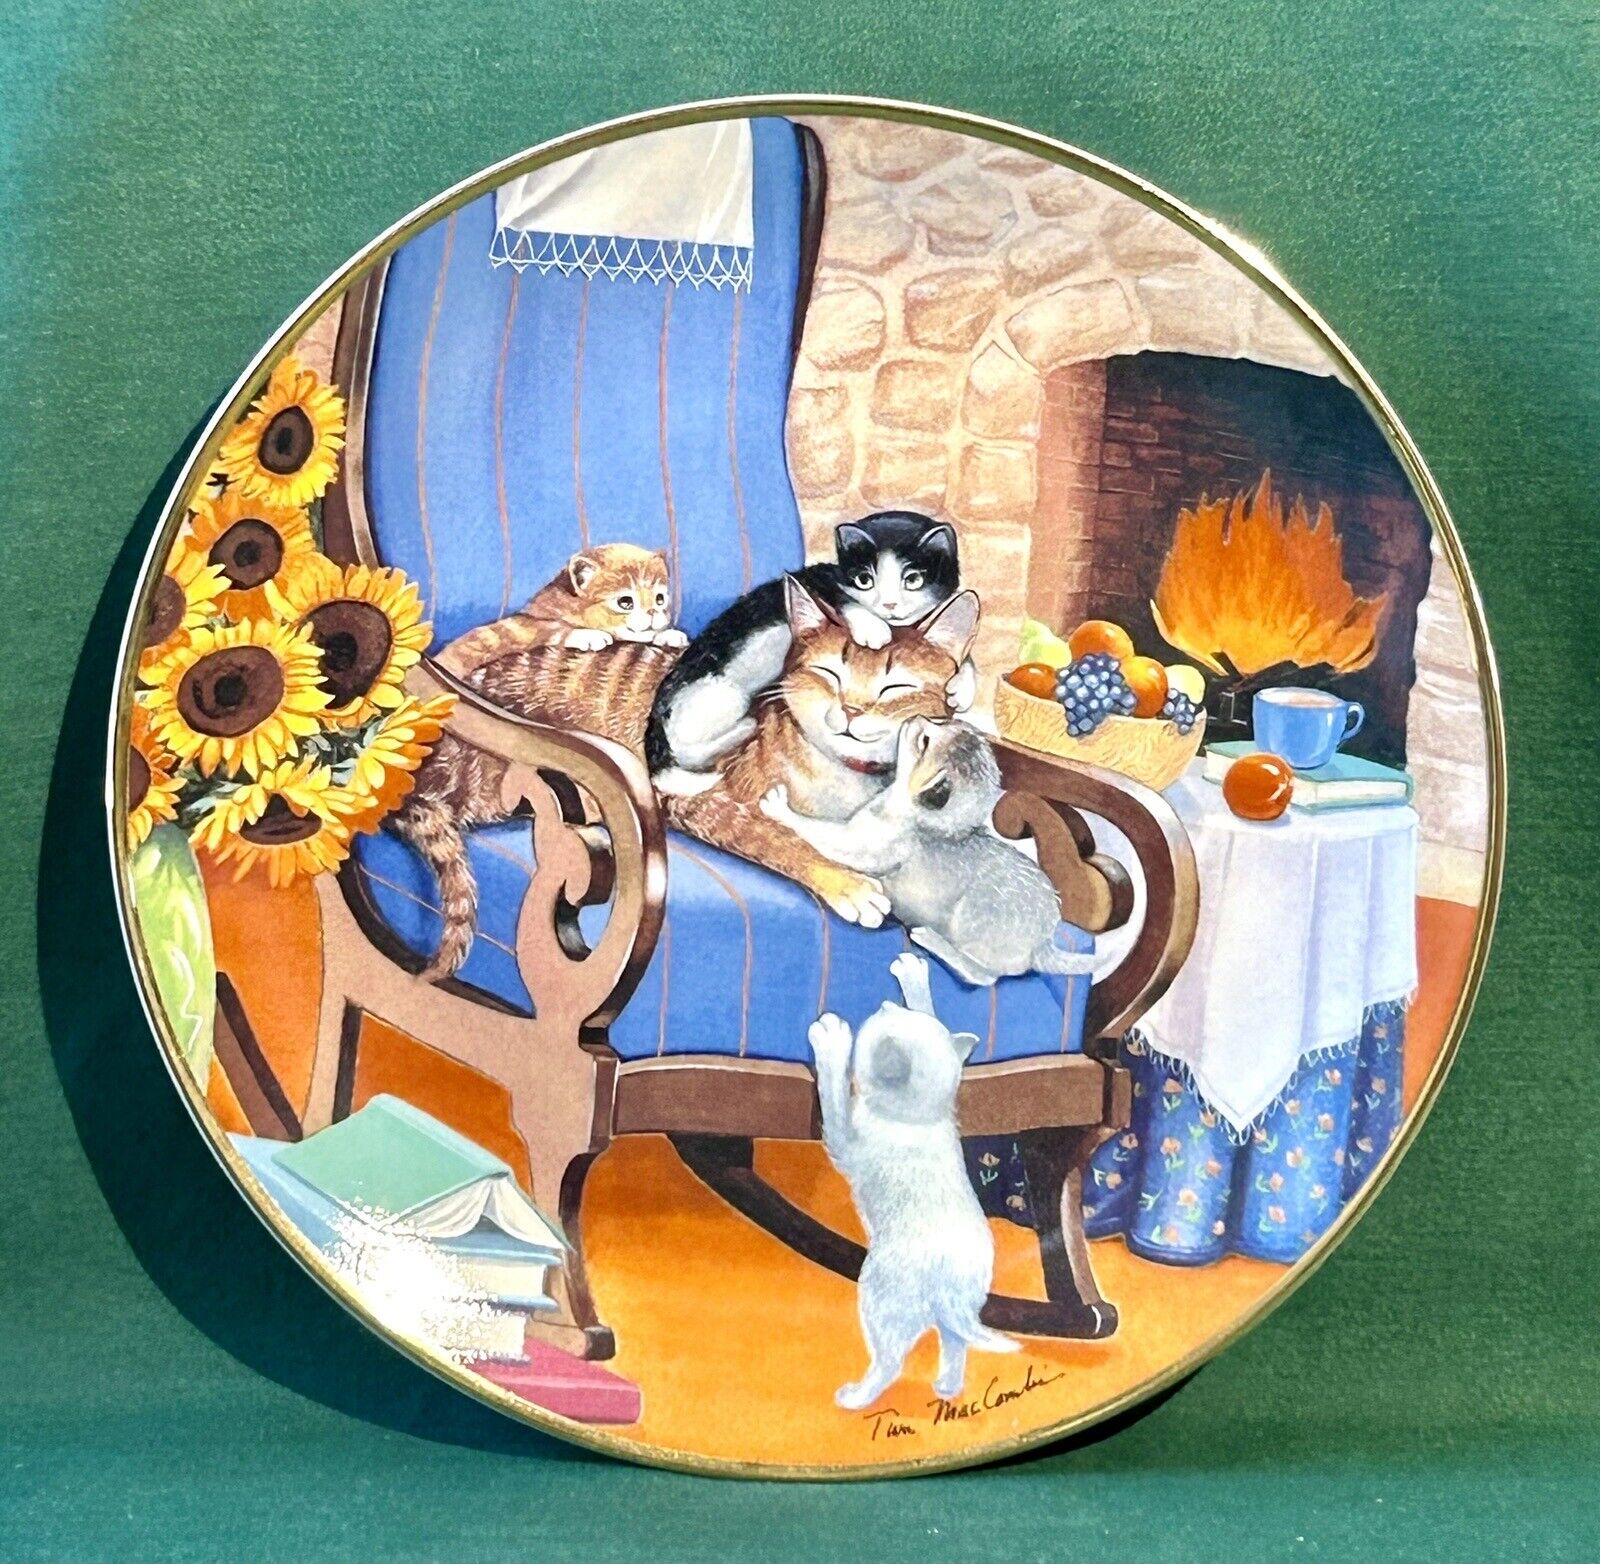 Franklin Mint 1991 “Time to Play” By Turi MacCombie Limited Edition Plate Exc